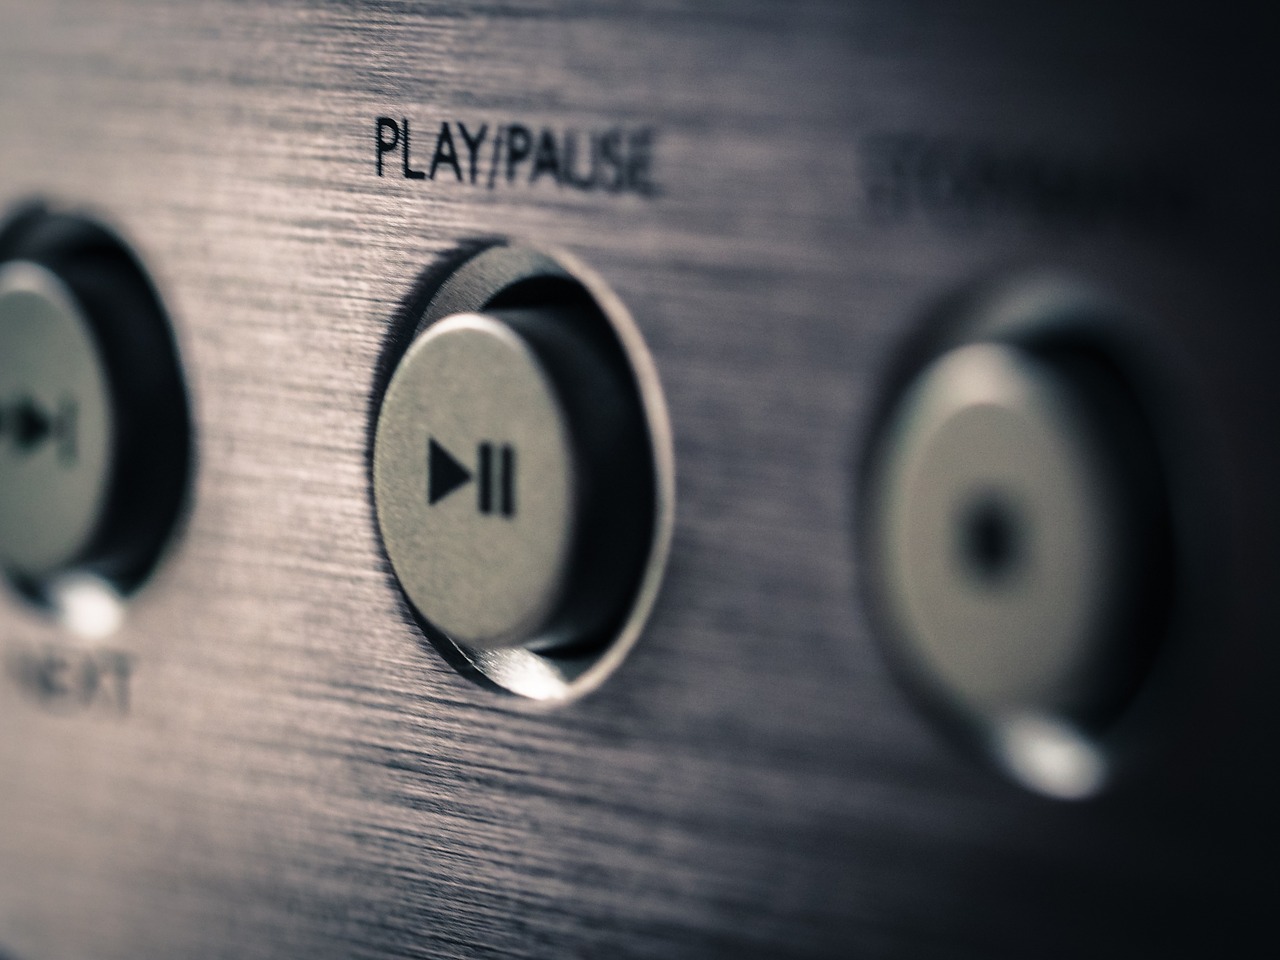 Close up shot of an audio device with a focus on the play button.